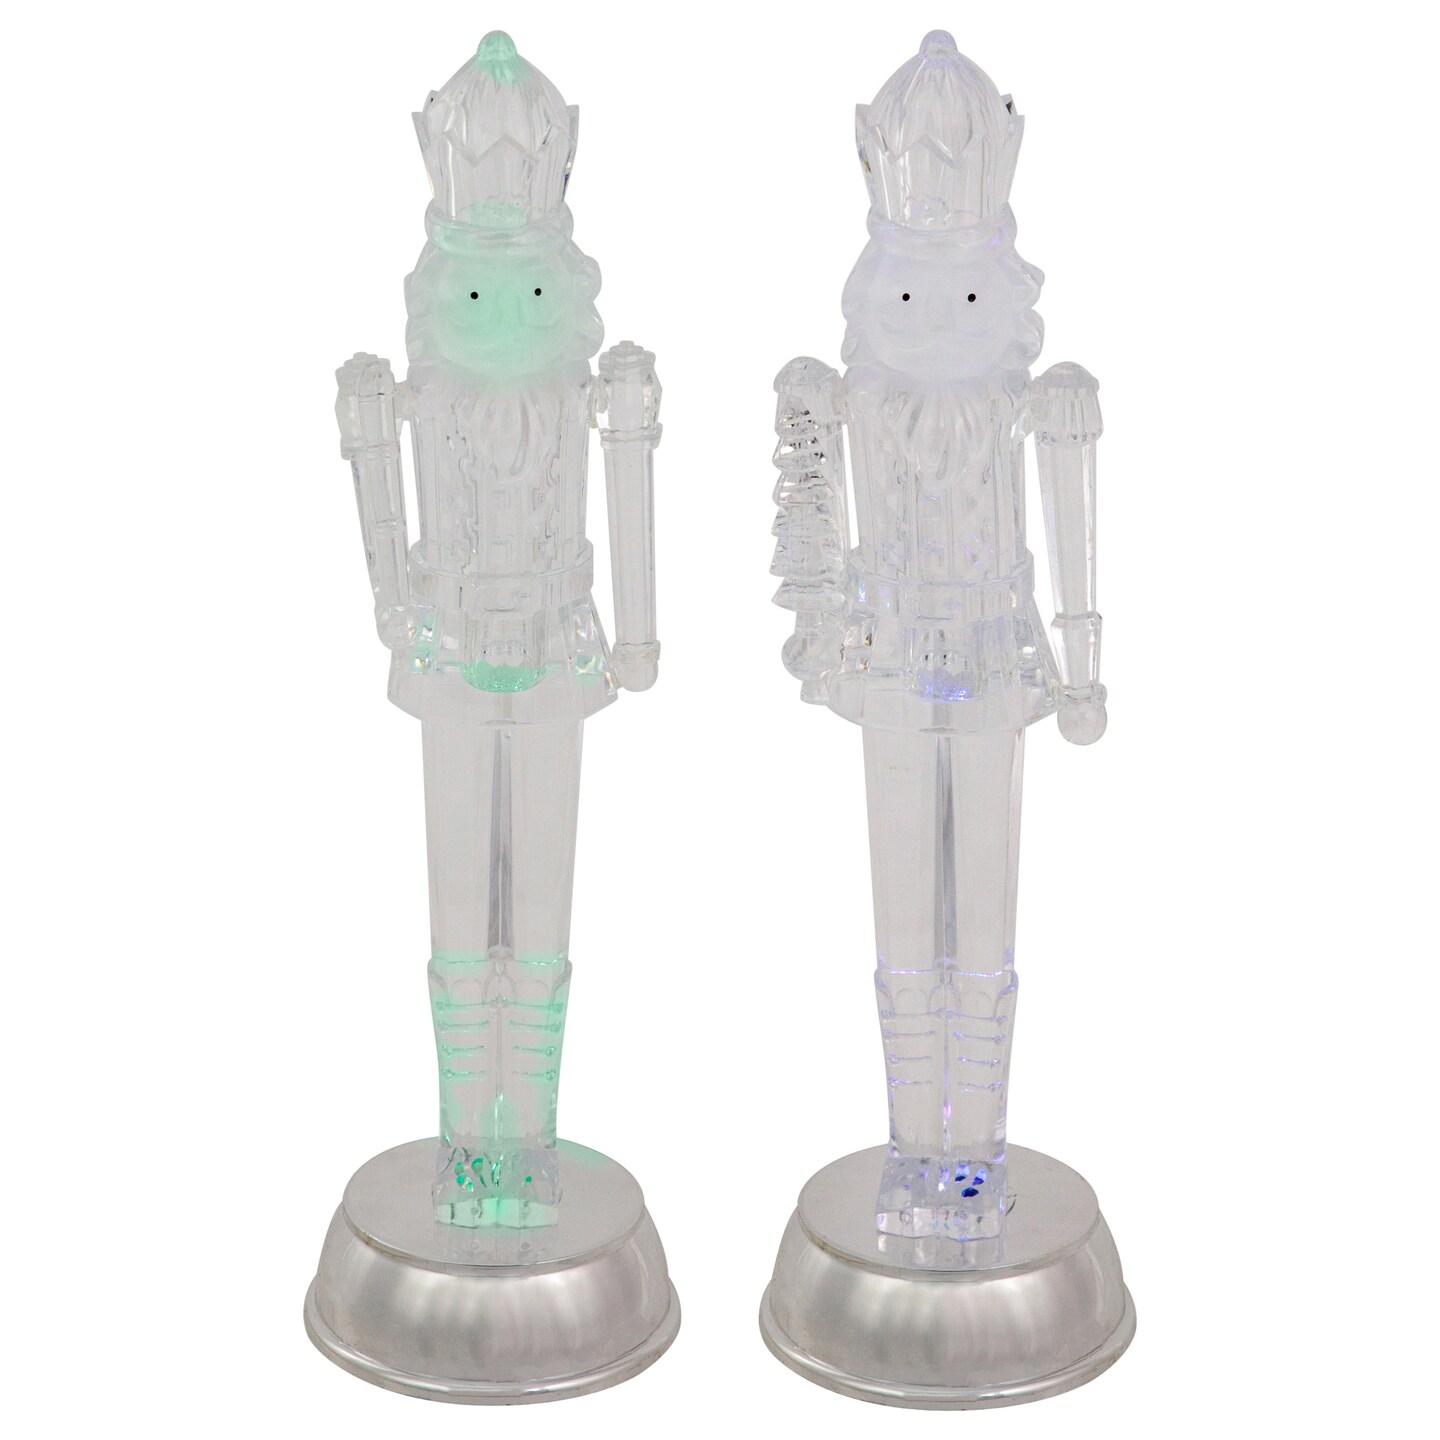 Northlight Set of 2 LED Lighted and Musical Nutcracker Christmas Figurines, 12.5-Inch